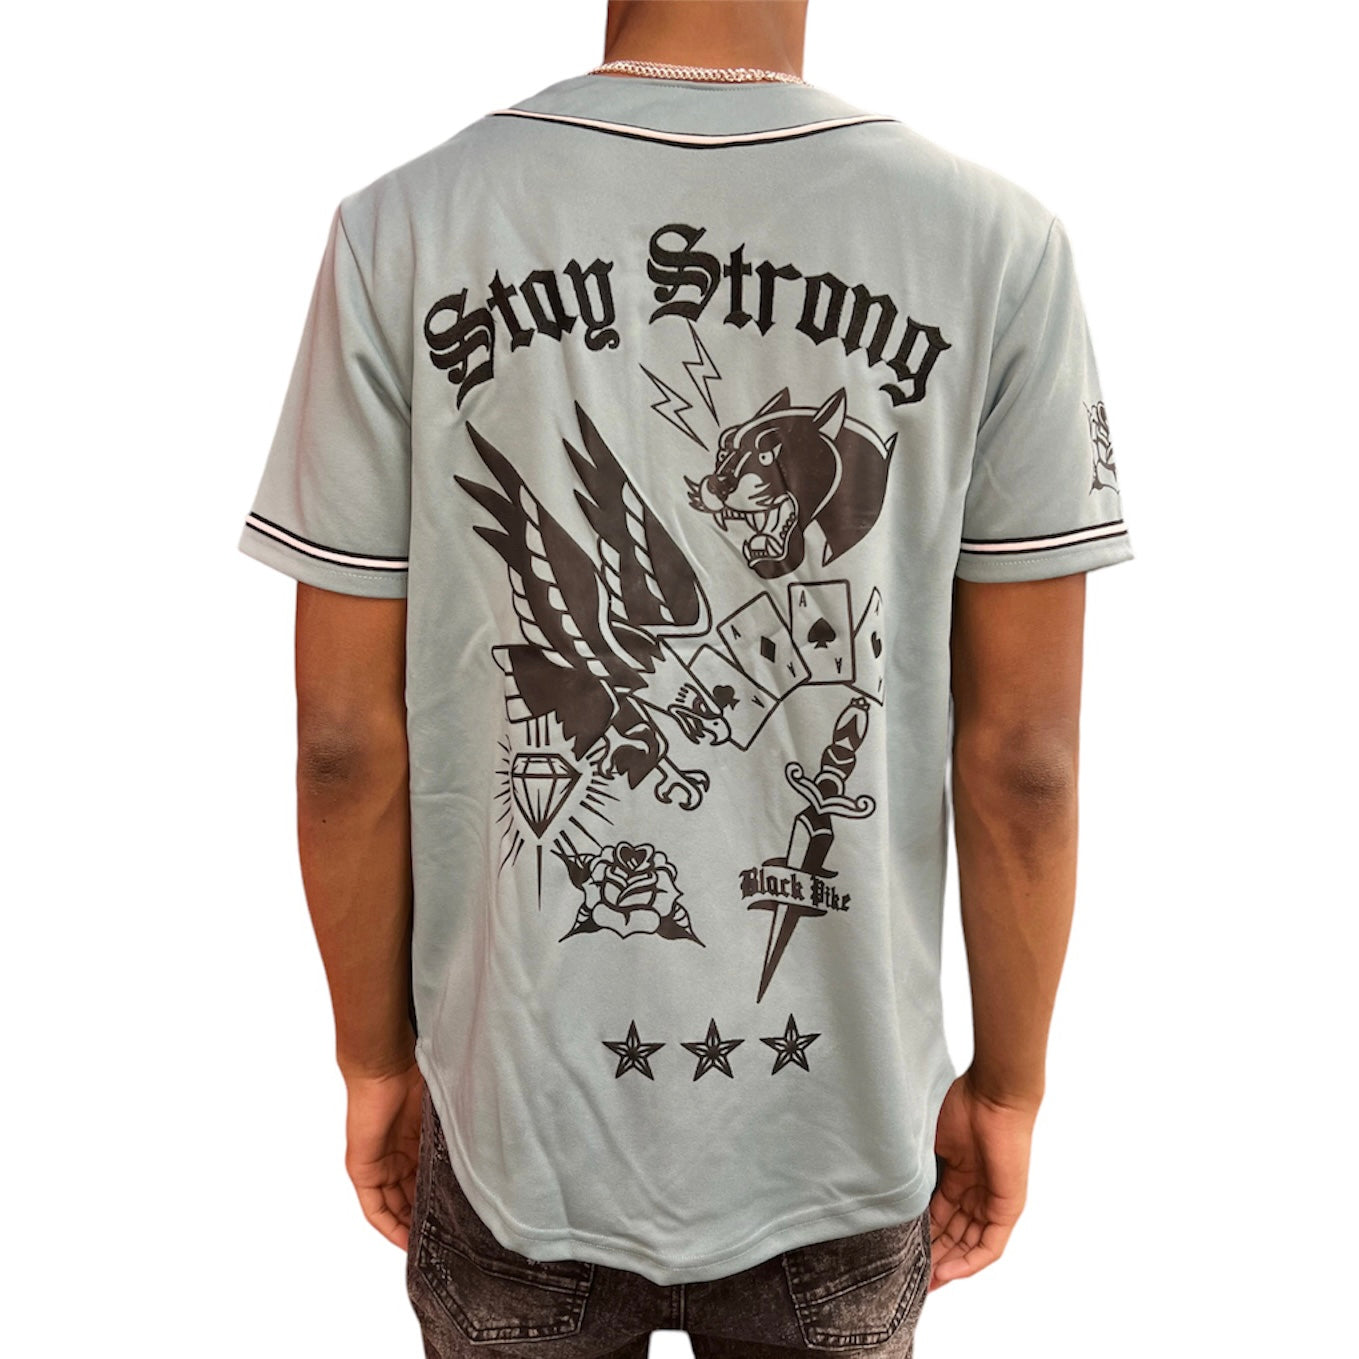 BLACK PIKE STAY STRONG DUST BLUE JERSEY